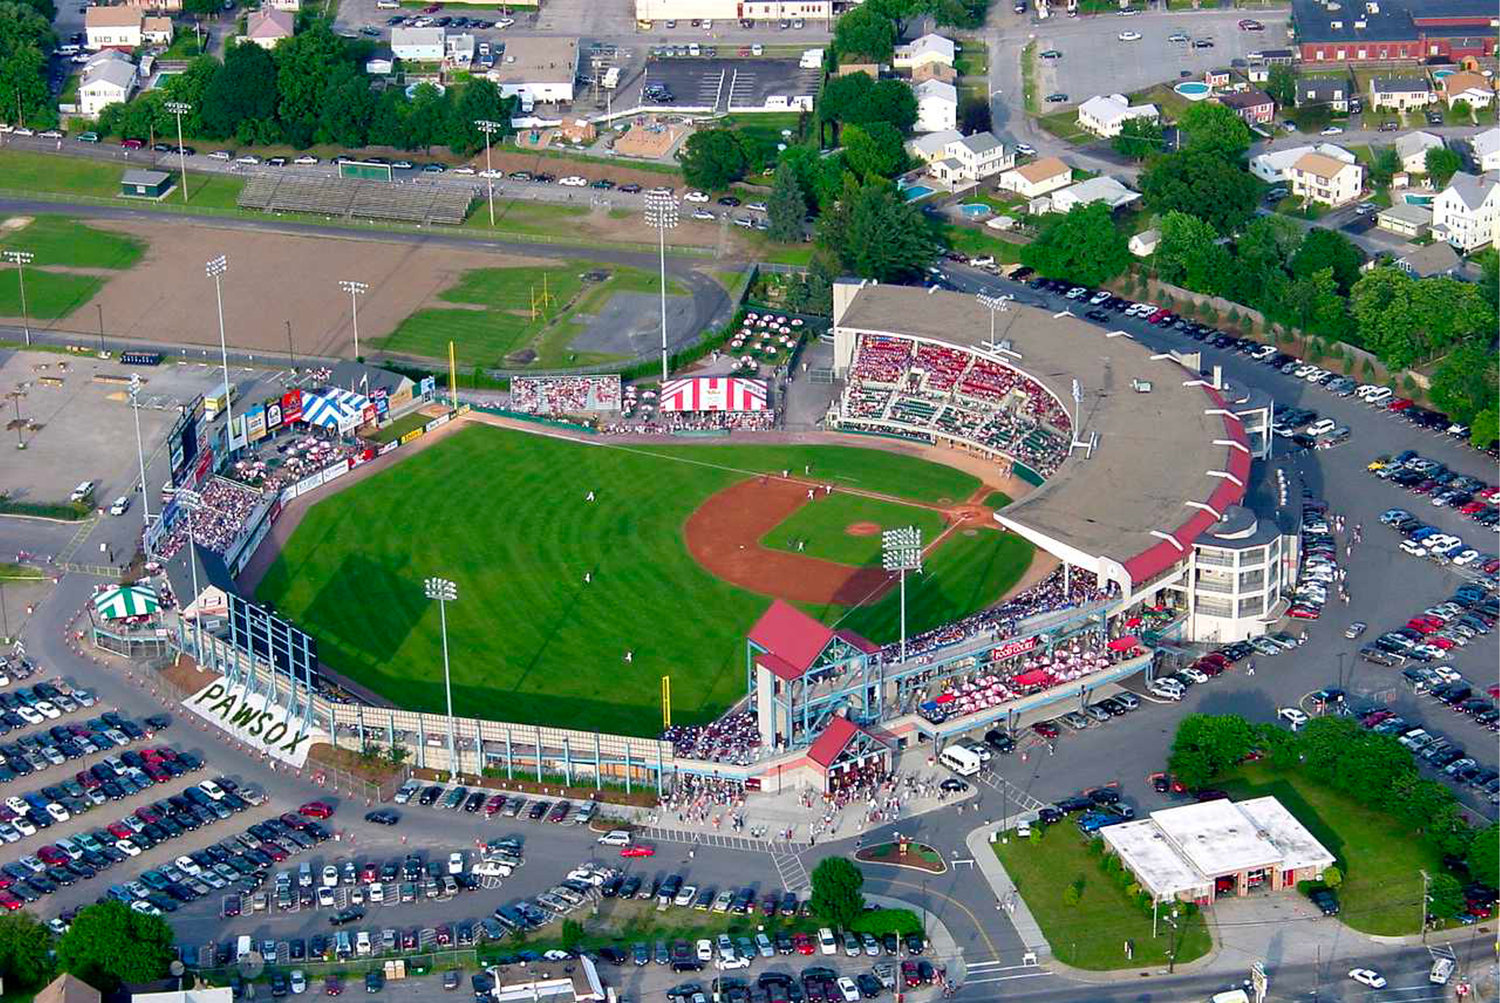 The future of McCoy Stadium is still up in the air, but we have some ideas